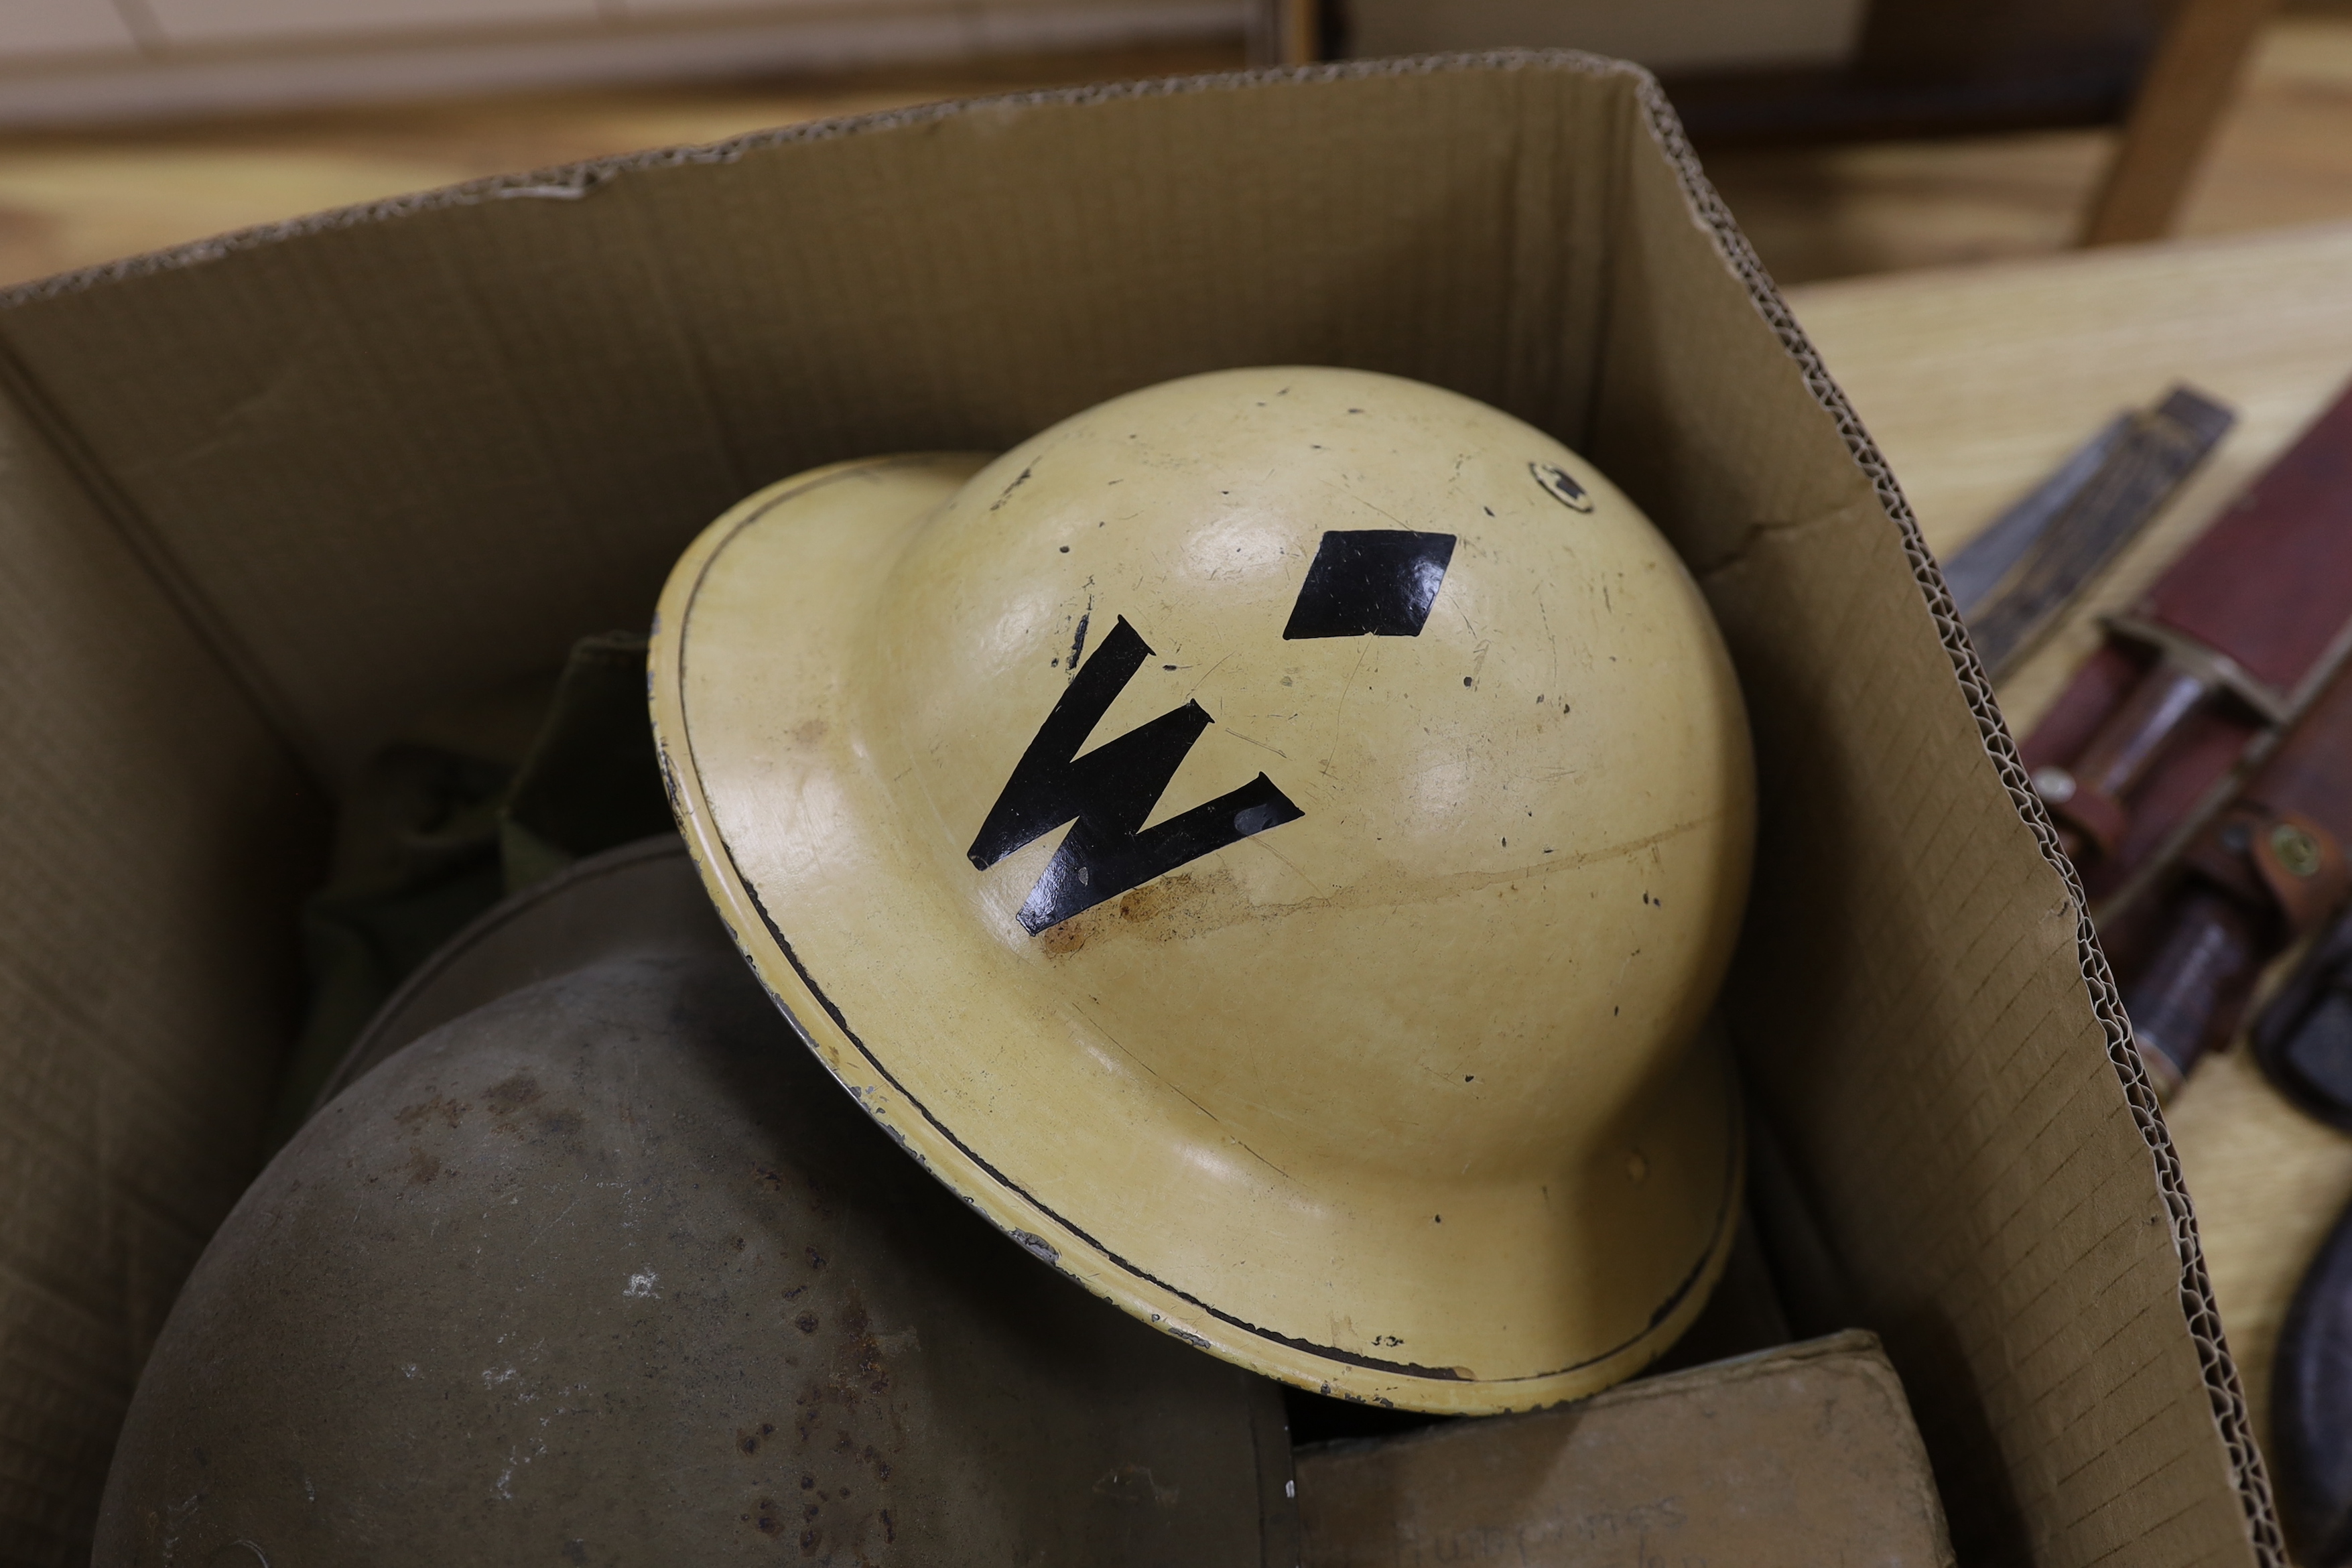 Six military etc. tin helmets. Including an example, painted as an Air Raid Warden’s helmet, with other items, including a military shoulder bag etc.